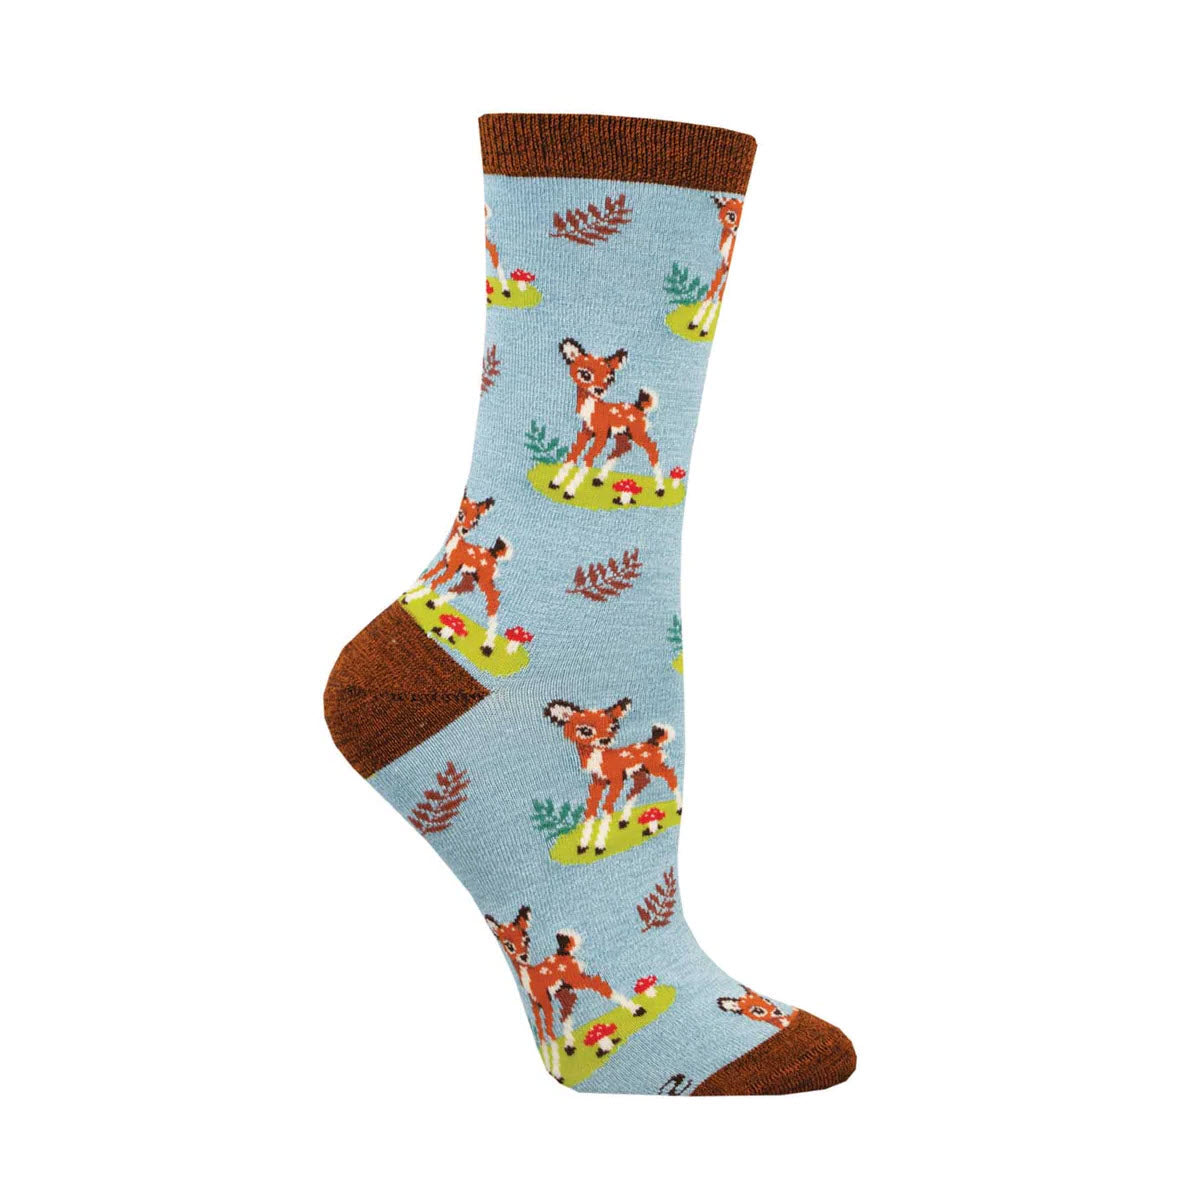 A single Socksmith Bamboo Crew sock in "Oh Deer Blue" with a pattern of small deer and yellow ducks frolicking, featuring brown heel, toe, and cuff.